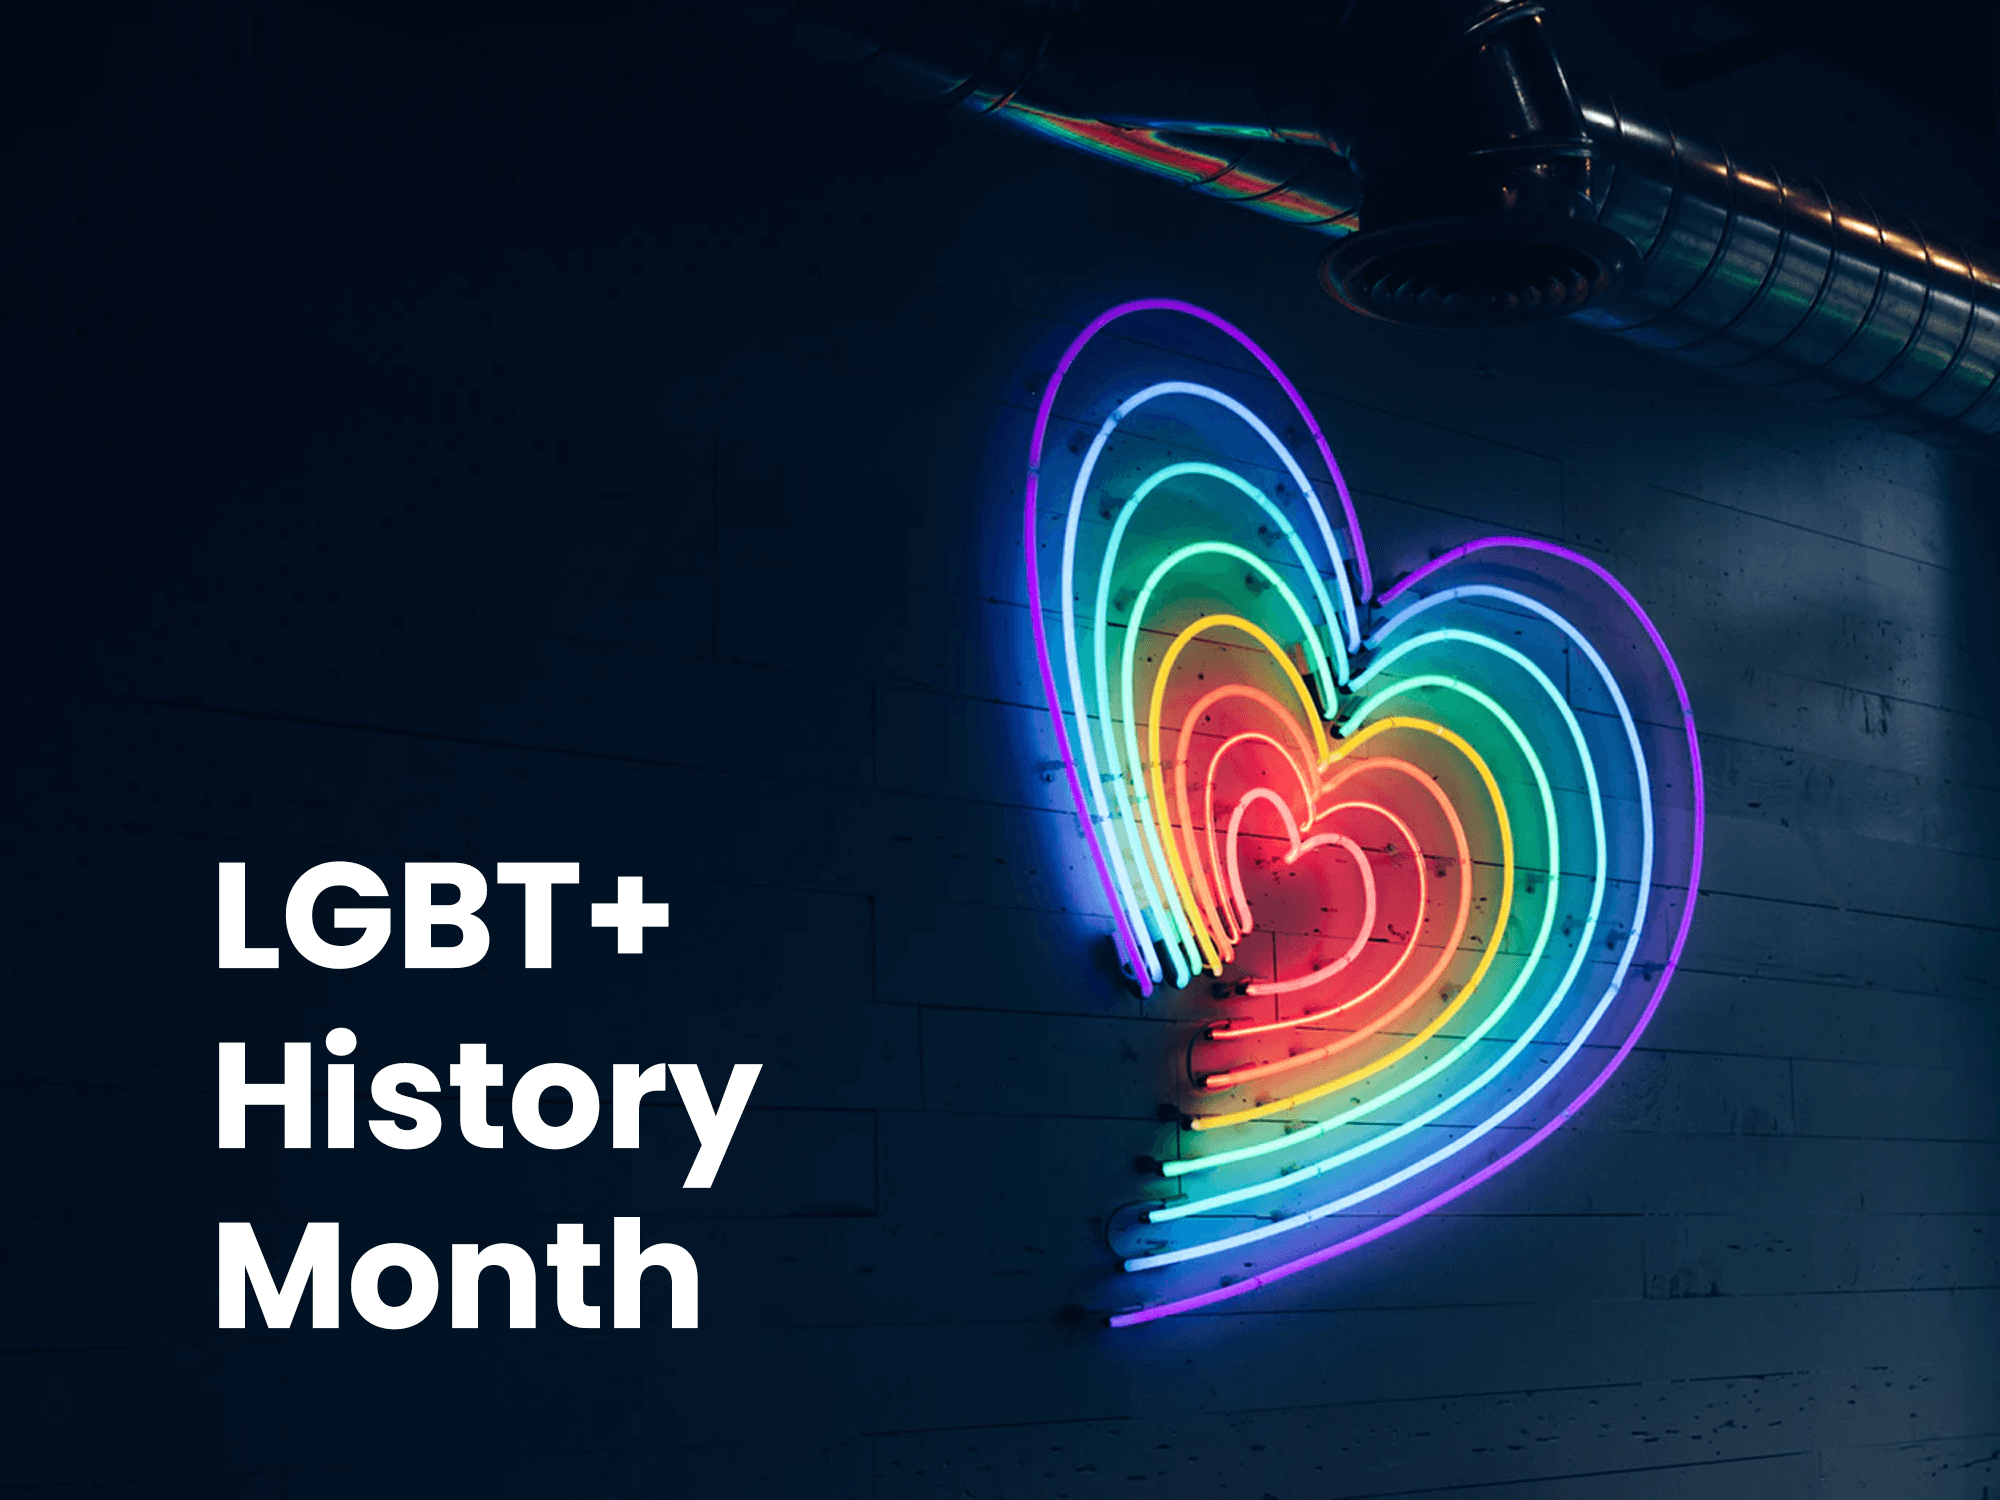 Montreal Careers | Why is LGBT History Month important?